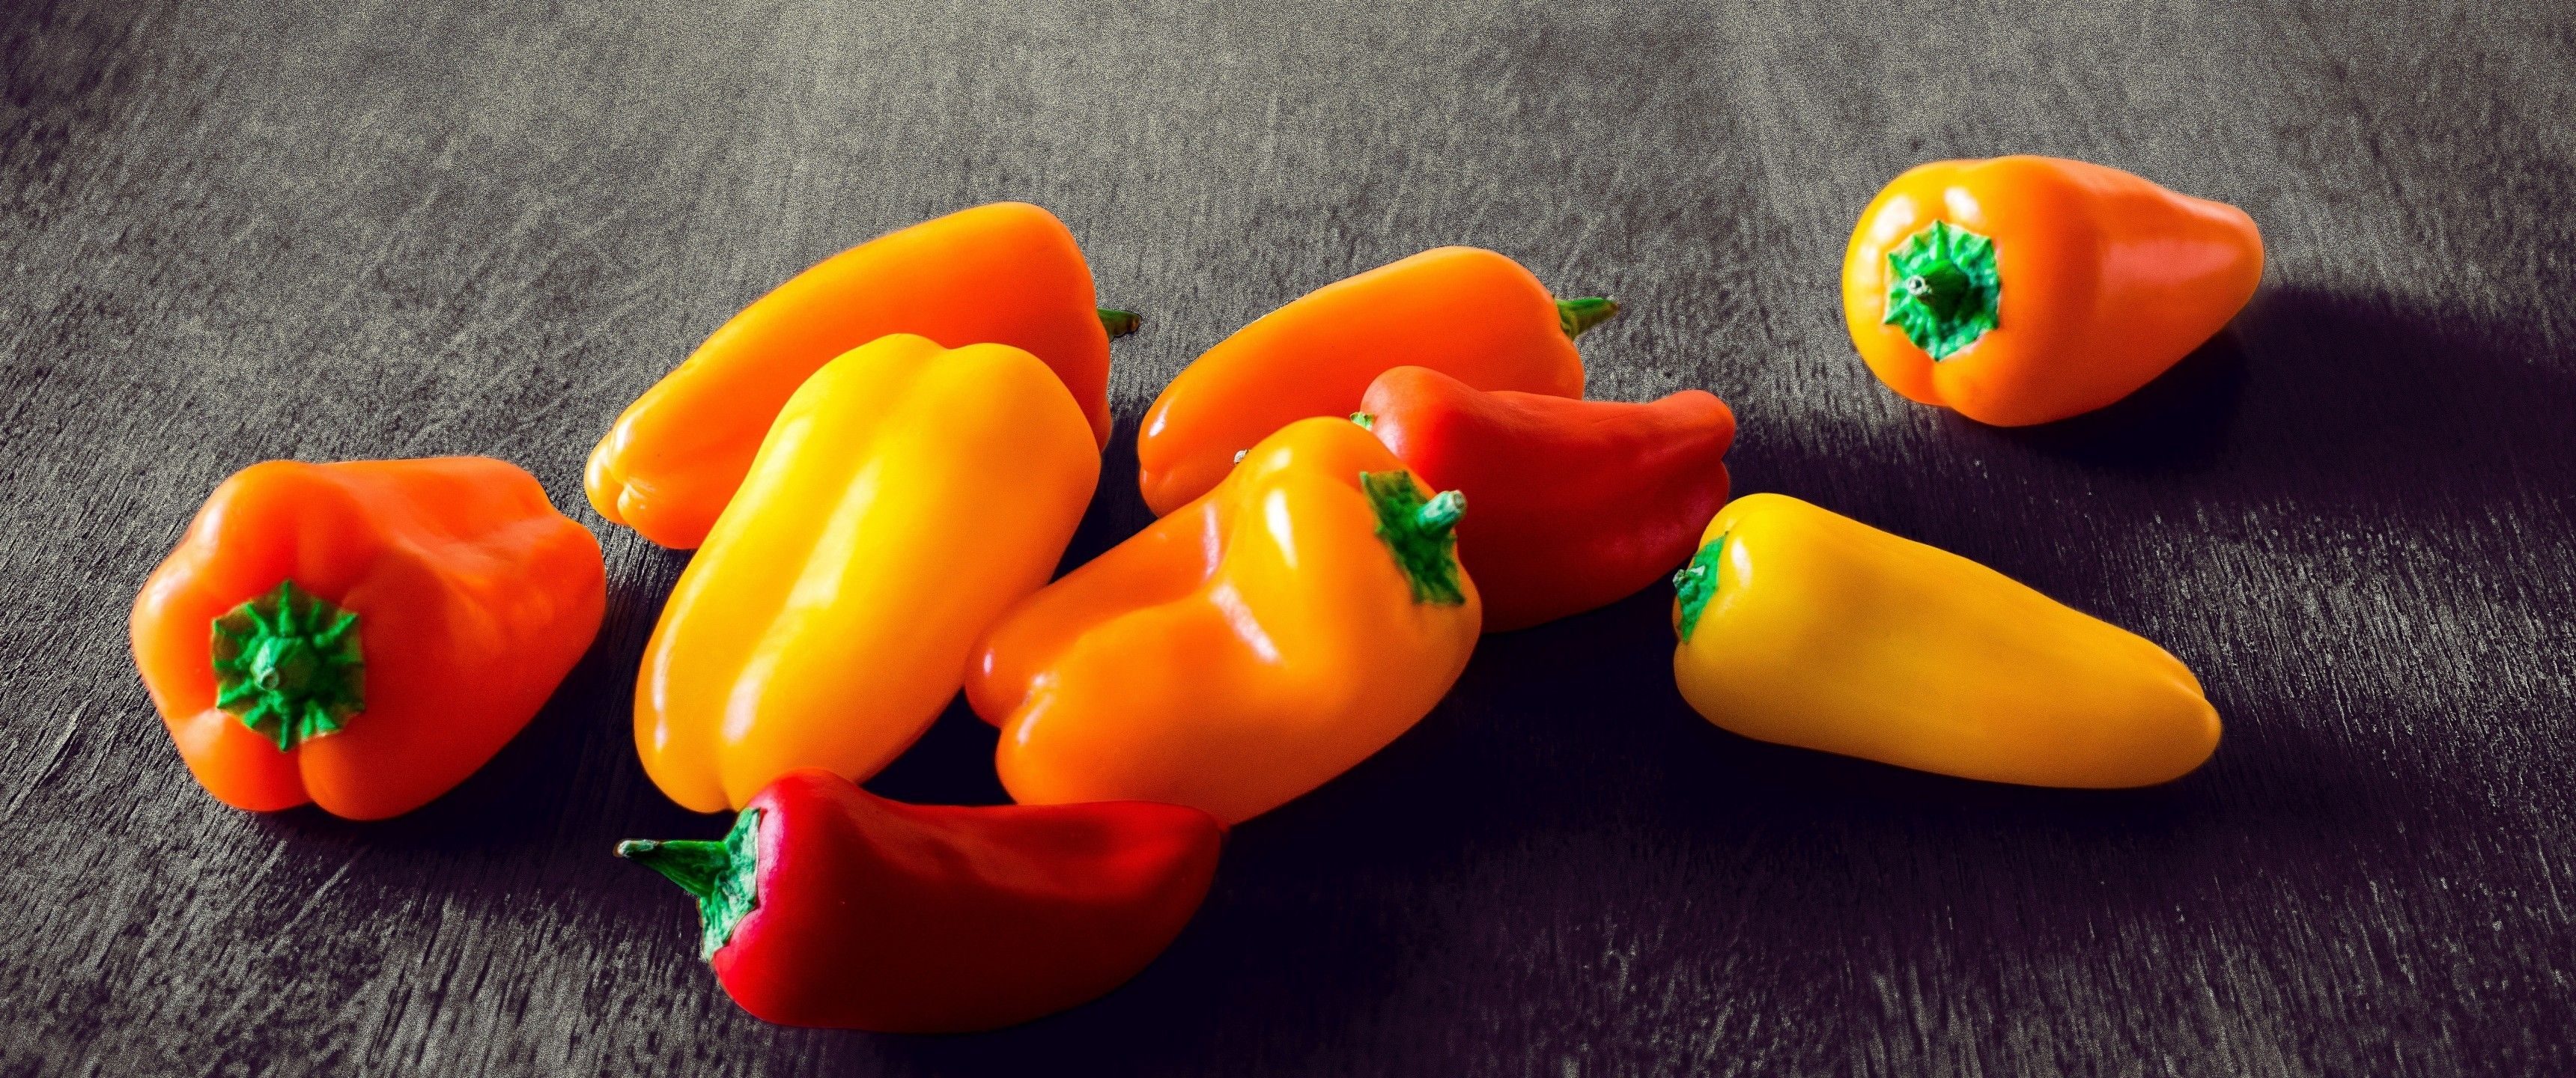 Download 3440x1440 Red Pepper, Peppers, Vegetables Wallpaper